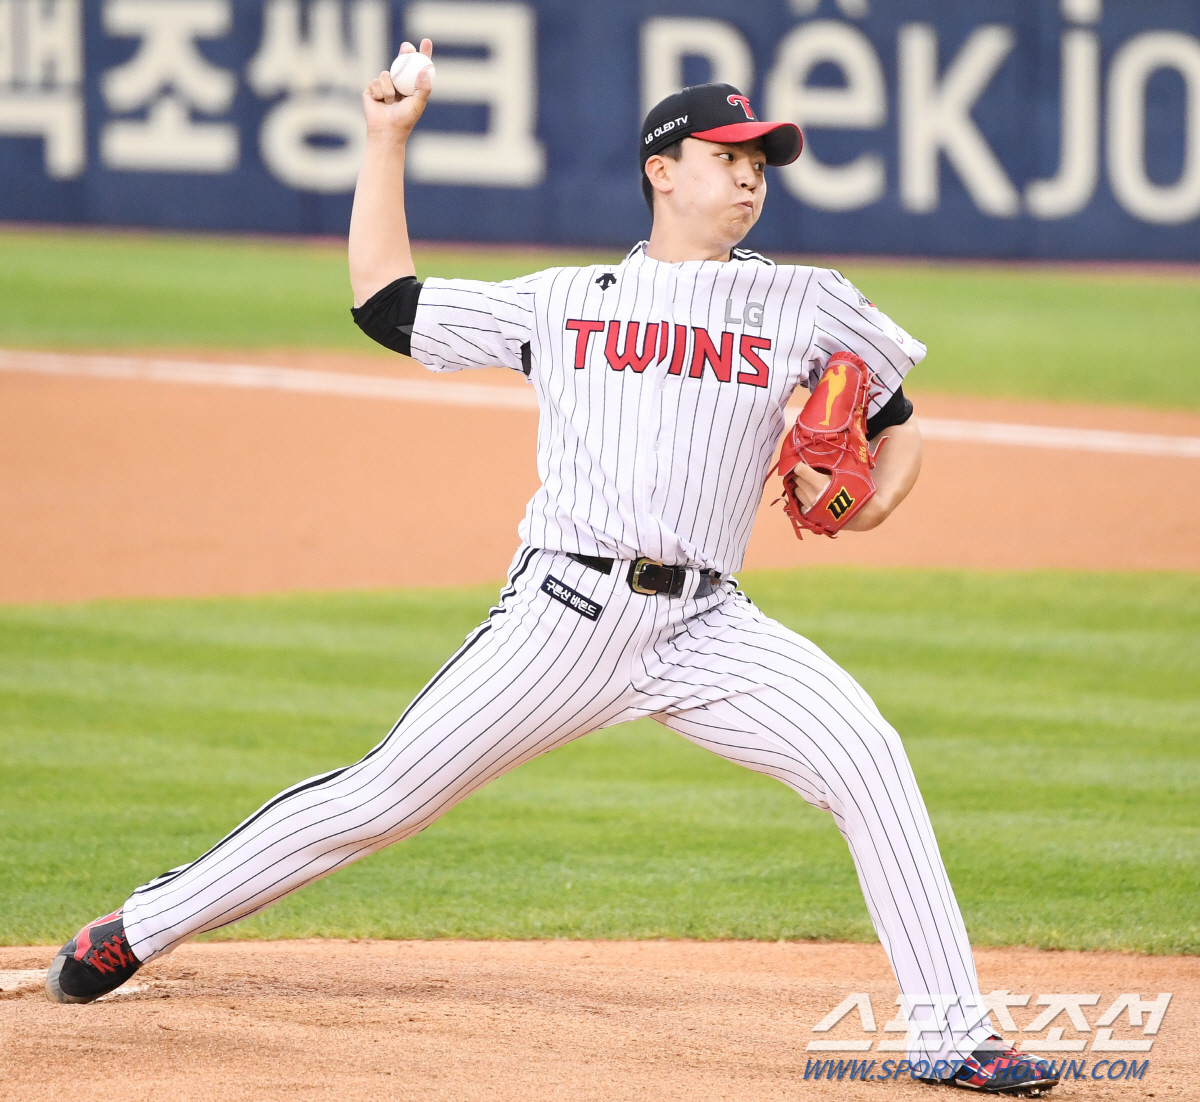 A return match in 12 days, two Luxury pitchers of the two Youngs embroidered the Jamsil-dong bee.LG Twins rookie Lee Min-ho (19) and Samsung Lions Lions second-year Won Tae-in (20) faced off for the second time in the season at Jamsil-dong Stadium on the 2nd.In his first meeting at Deagu on the 21st of last month, Lee Min-ho won the victory with one hit in 513 innings, and Won Tae-in became a losing pitcher with two runs in seven innings.However, in 12 days, Won Tae-in succeeded in playing the game with the result of moving the place to Jamsil-dong.But Luxurys pitching between the two remained.Lee Min-ho was overwhelmed by giving up two points in the first inning, but he blocked additional runs until the seventh inning and recorded his first quality start with two brilliant pitches with seven hits and seven strikeouts in seven innings.Won Tae-in cooked the LG batting lightly this time, and continued his quality start+ for the last three games with five hits and no runs in seven innings.The Samsung Lions, who played the game of Won Tae-in, won the game with a 2-0 victory over LG.Lee Min-ho allowed two hits and one walk in the bottom of the first inning, allowing two runs.Lee Min-ho, who had a hit in front of the right fielder and Park Chan-do on the walk, was hit by a second and second baseman, and Tyler Saladino, who is proud of his hitting sense, was hit by a second baseman who hit a second baseman with a 120-kilometer curve thrown from the ball count 2B2S in the middle.However, Lee Min-ho later gave up only sporadic hits and walks, showing off his outstanding performance and subduing the Samsung Lions batting line; the winning streak was six innings.The situation is shaking as Park Chan-do is sent to straight walks.However, Lee Min-ho struck out Saladino, who had taken two hits earlier, with a 129-kilometer forkball, struck out Lee Won-seok with a body cutter, and Lee Hak-joo with a second baseman grounder.In the seventh inning, Kim Dong-yeops left-handed hitter struck out Lee Sung-gyu and then Kang Min-ho dropped to a low curve to lead shortstop.Won Tae-in was impressive with a perfect control that did not give up a single four-stroke, all five hits were hit by a change ball, and the ball tip and ball ball of the fastball effectively worked.Won Tae-in was hit by Kim Hyun-soo and Chae Eun-sung in the fourth inning with a 2-0 lead.However, Roberto Jordi Alba was thrown with a 147km fastball with a low strike outside and struck out a swing, then Kim Min-sung and Oh Ji-hwan were handed over to the outfield fly in succession.Since then, LG hitters have been more overwhelmed by Won Tae-in.Won Tae-in gave up a left-handed hit to leading Jordi Alba in the seventh after blocking the fifth and sixth innings, but Kim Min-sung finished second baseman Bodsalta and Oh Ji-hwan with a left fielder.